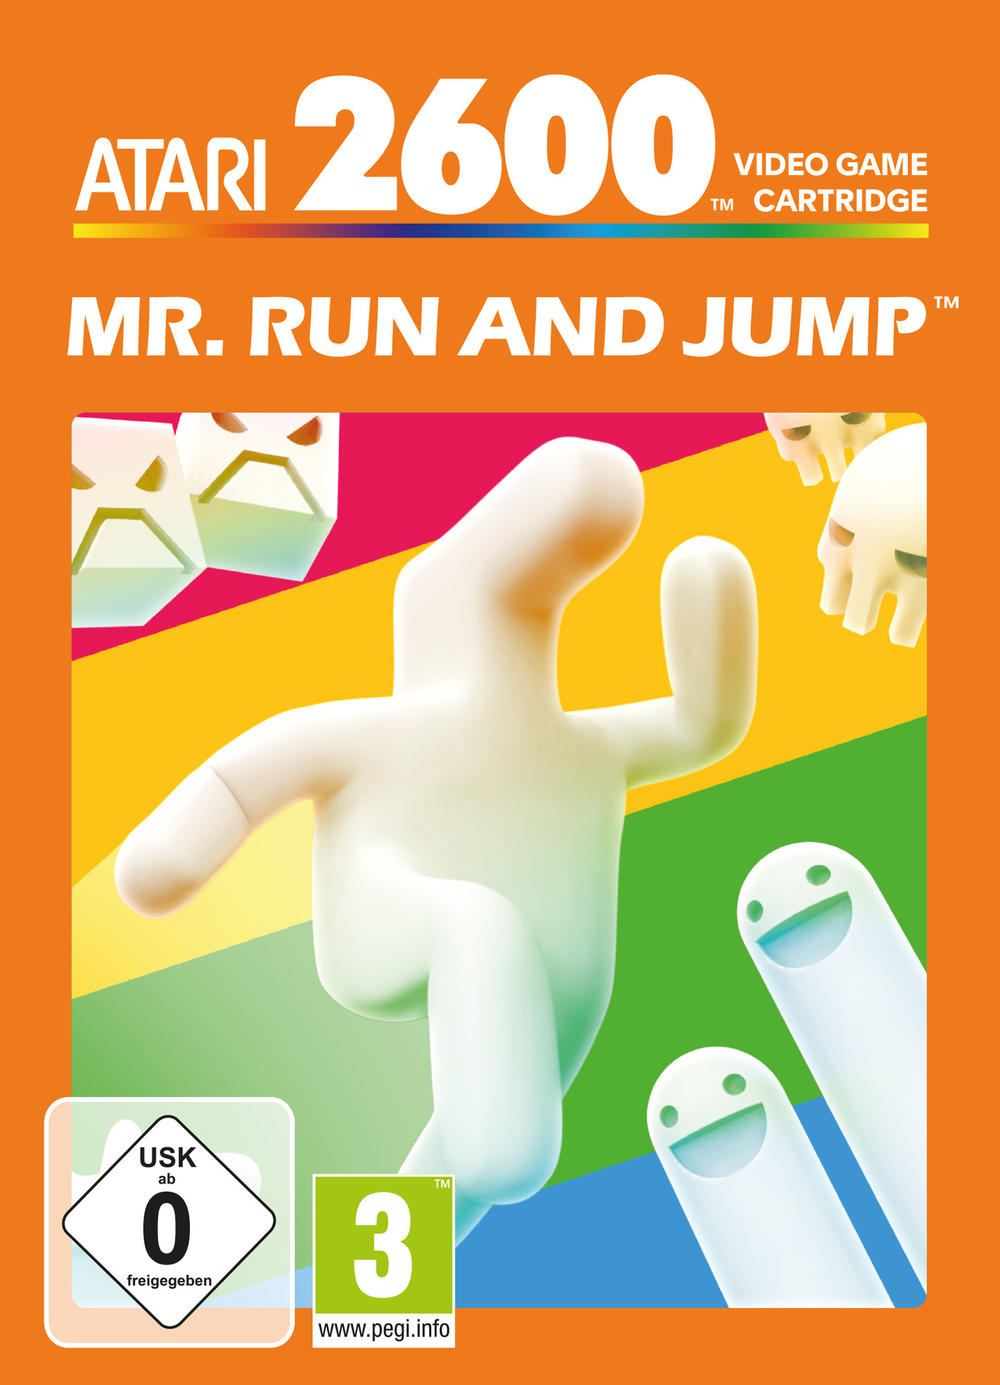 Mr. Run and Jump, an all-new game designed for the Atari 2600, which comes in a modernized version for other consoles.